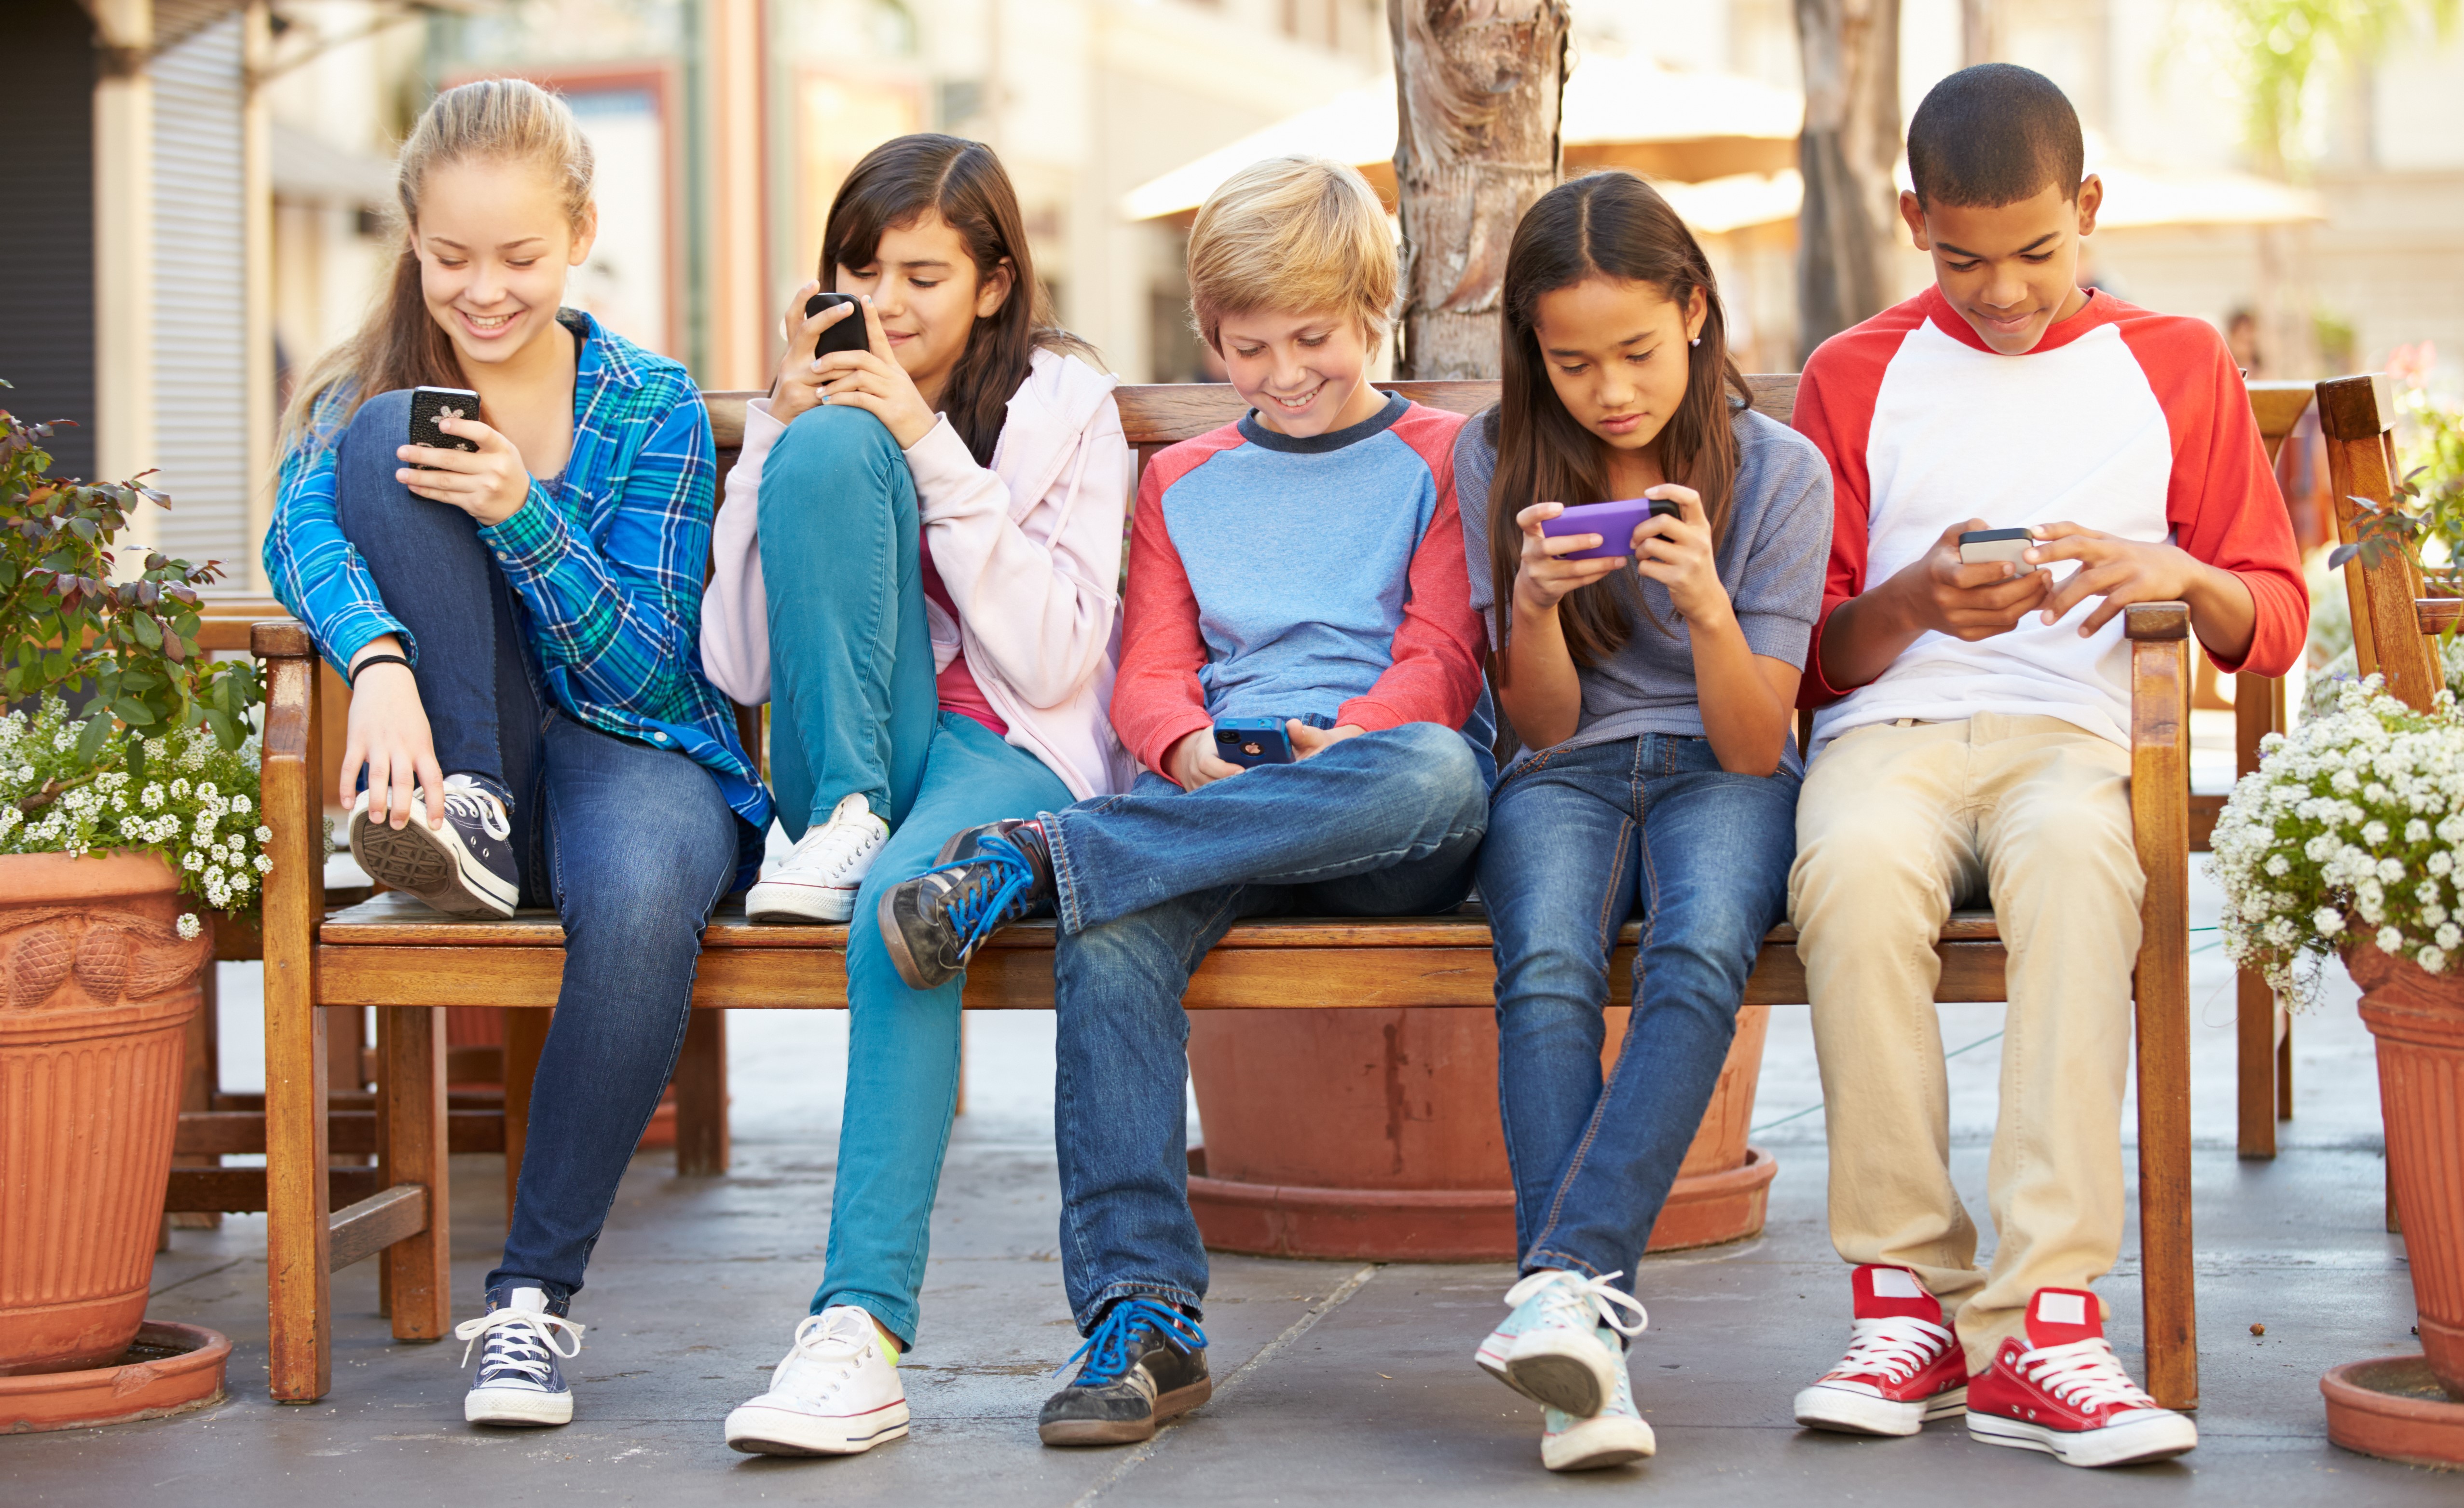 Online and Mobile App Safety: Tips for Parents of Tweens and Teens